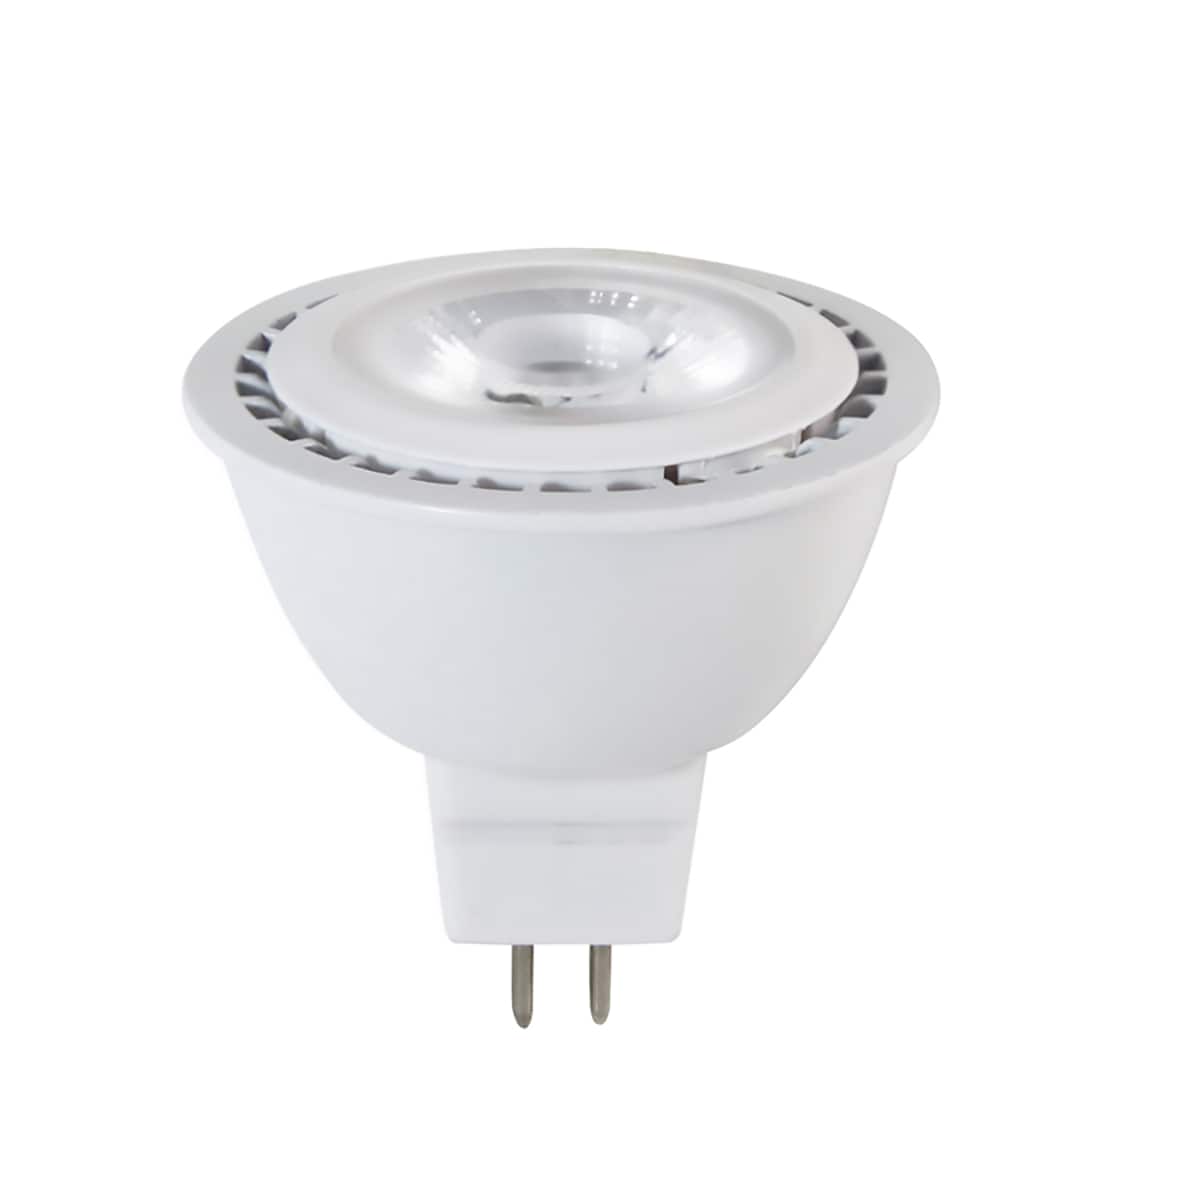 Dimmable LED MR16 Replacement Light Bulb, 5W